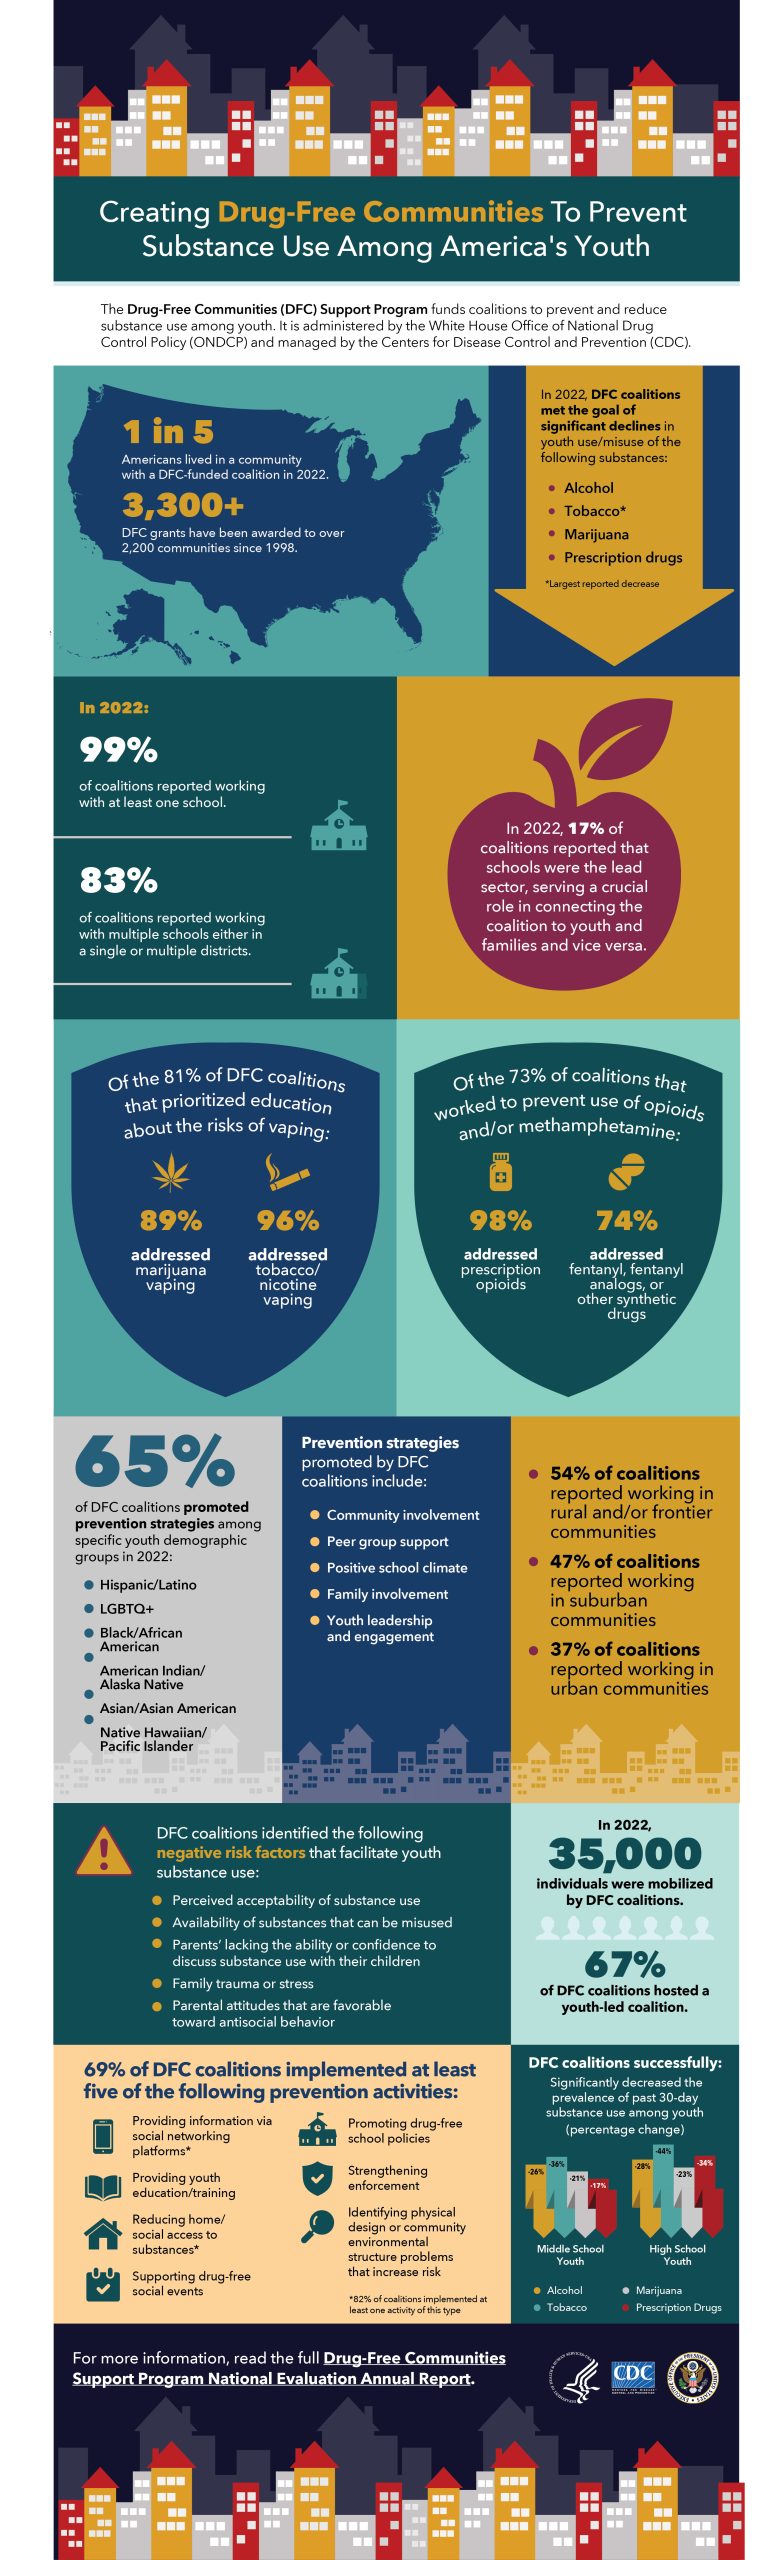 Creating Drug-Free Communities To Prevent Substance Use Among America's Youth